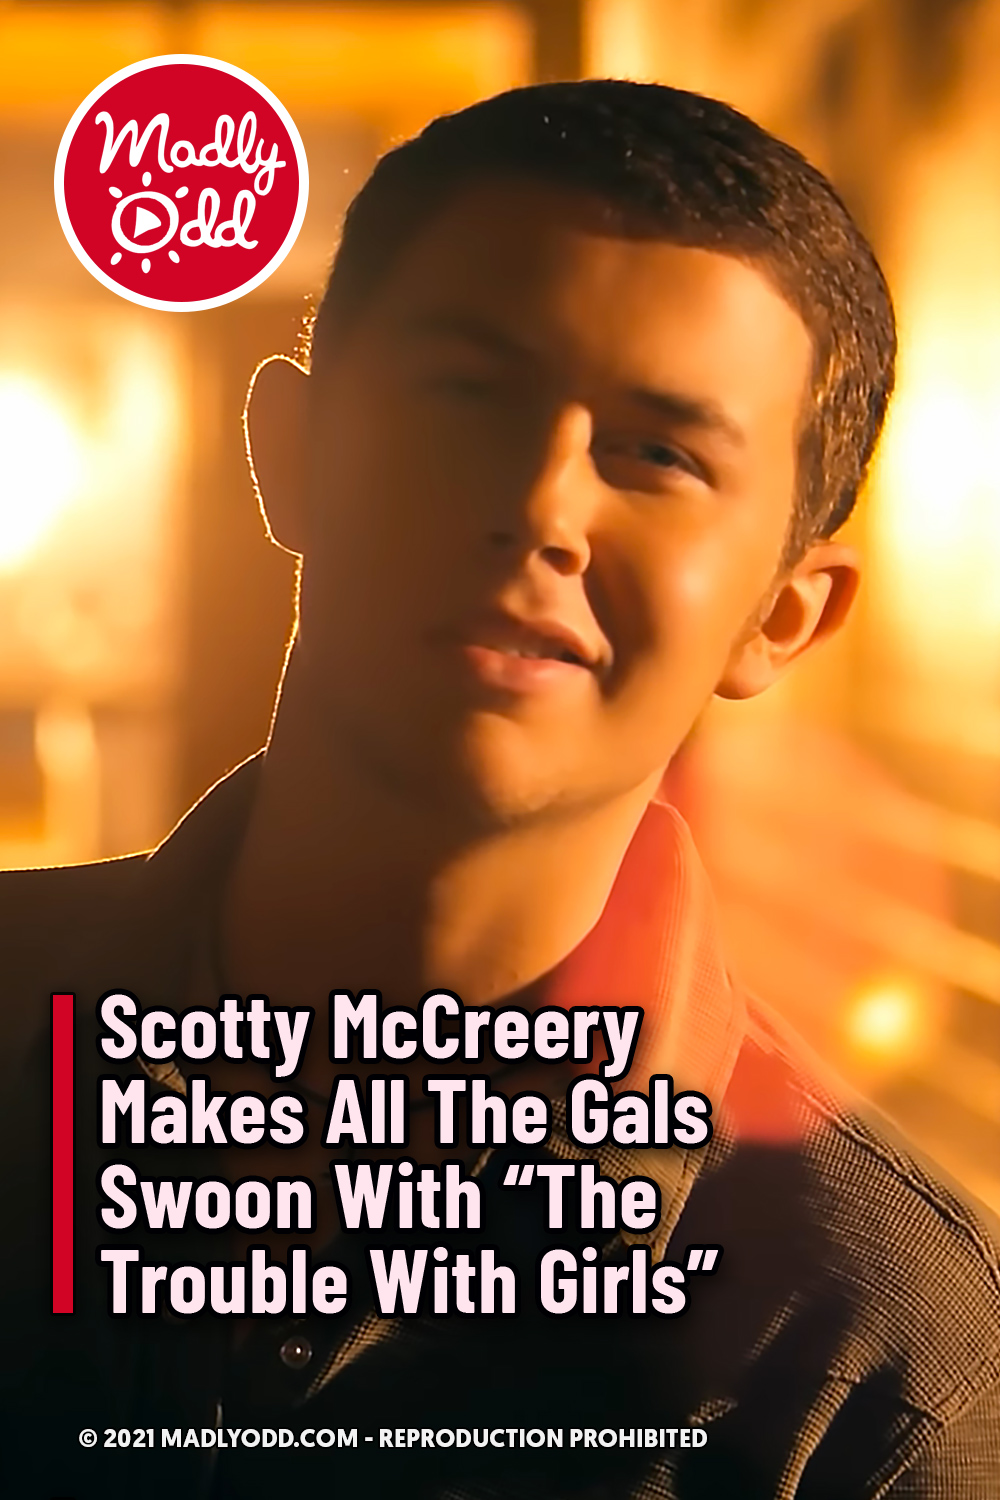 Scotty McCreery Makes All The Gals Swoon With “The Trouble With Girls”